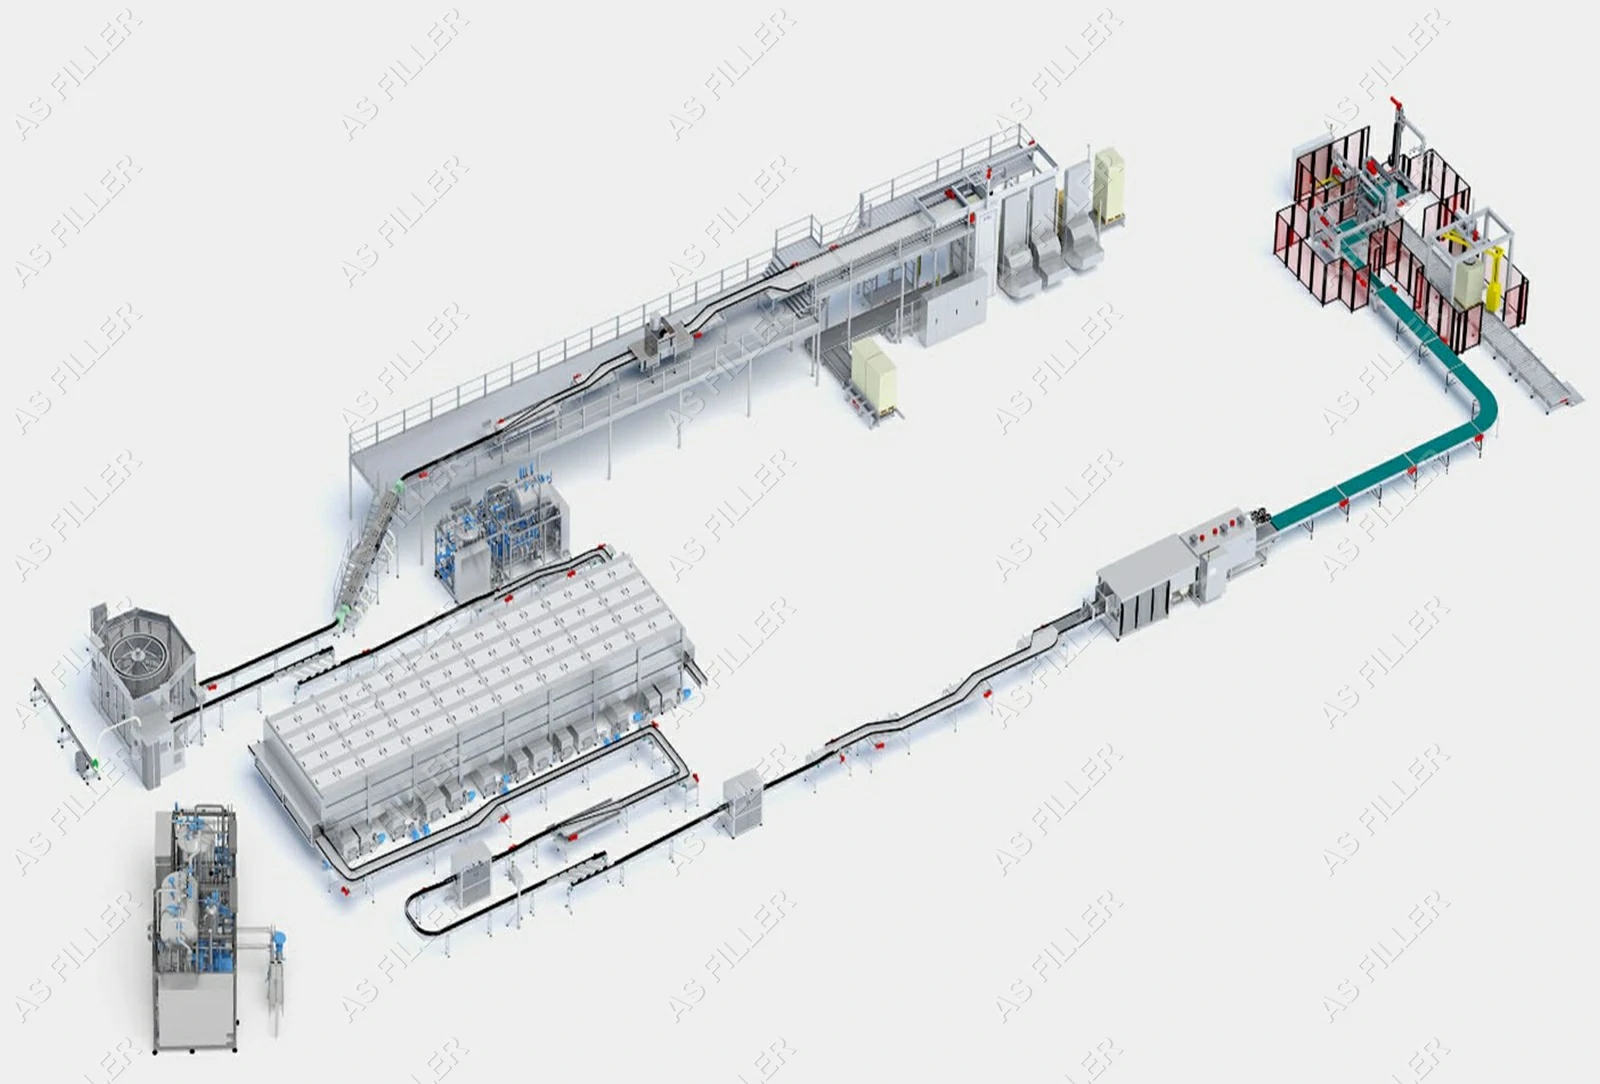 Cans Production Filling Line